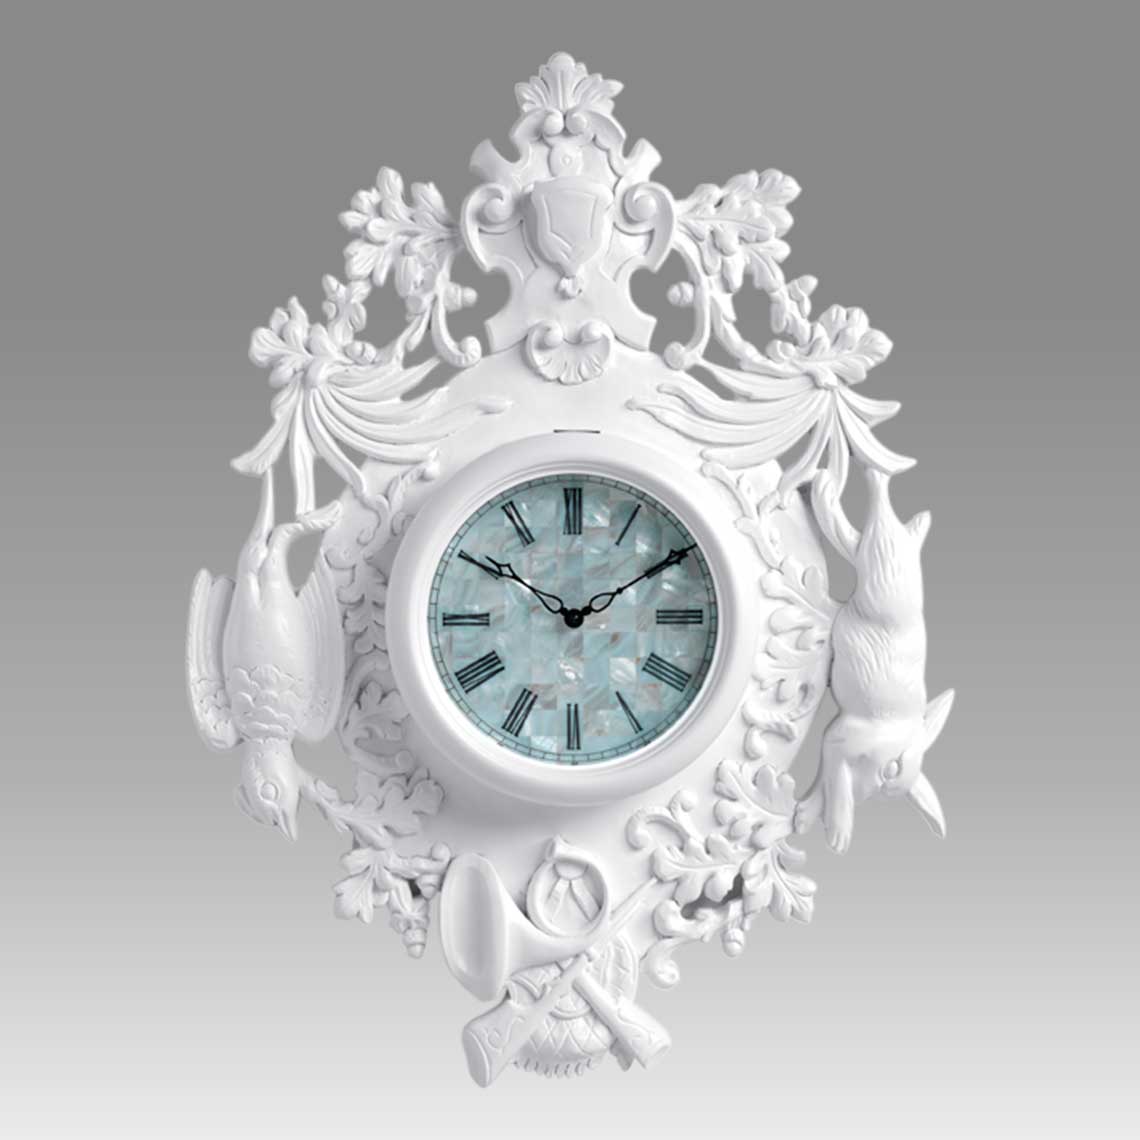 Modern cuckoo clock Art.greenwood 2500 lacquered with acrilic color white, real matherpearl dial with roman number serigrafy